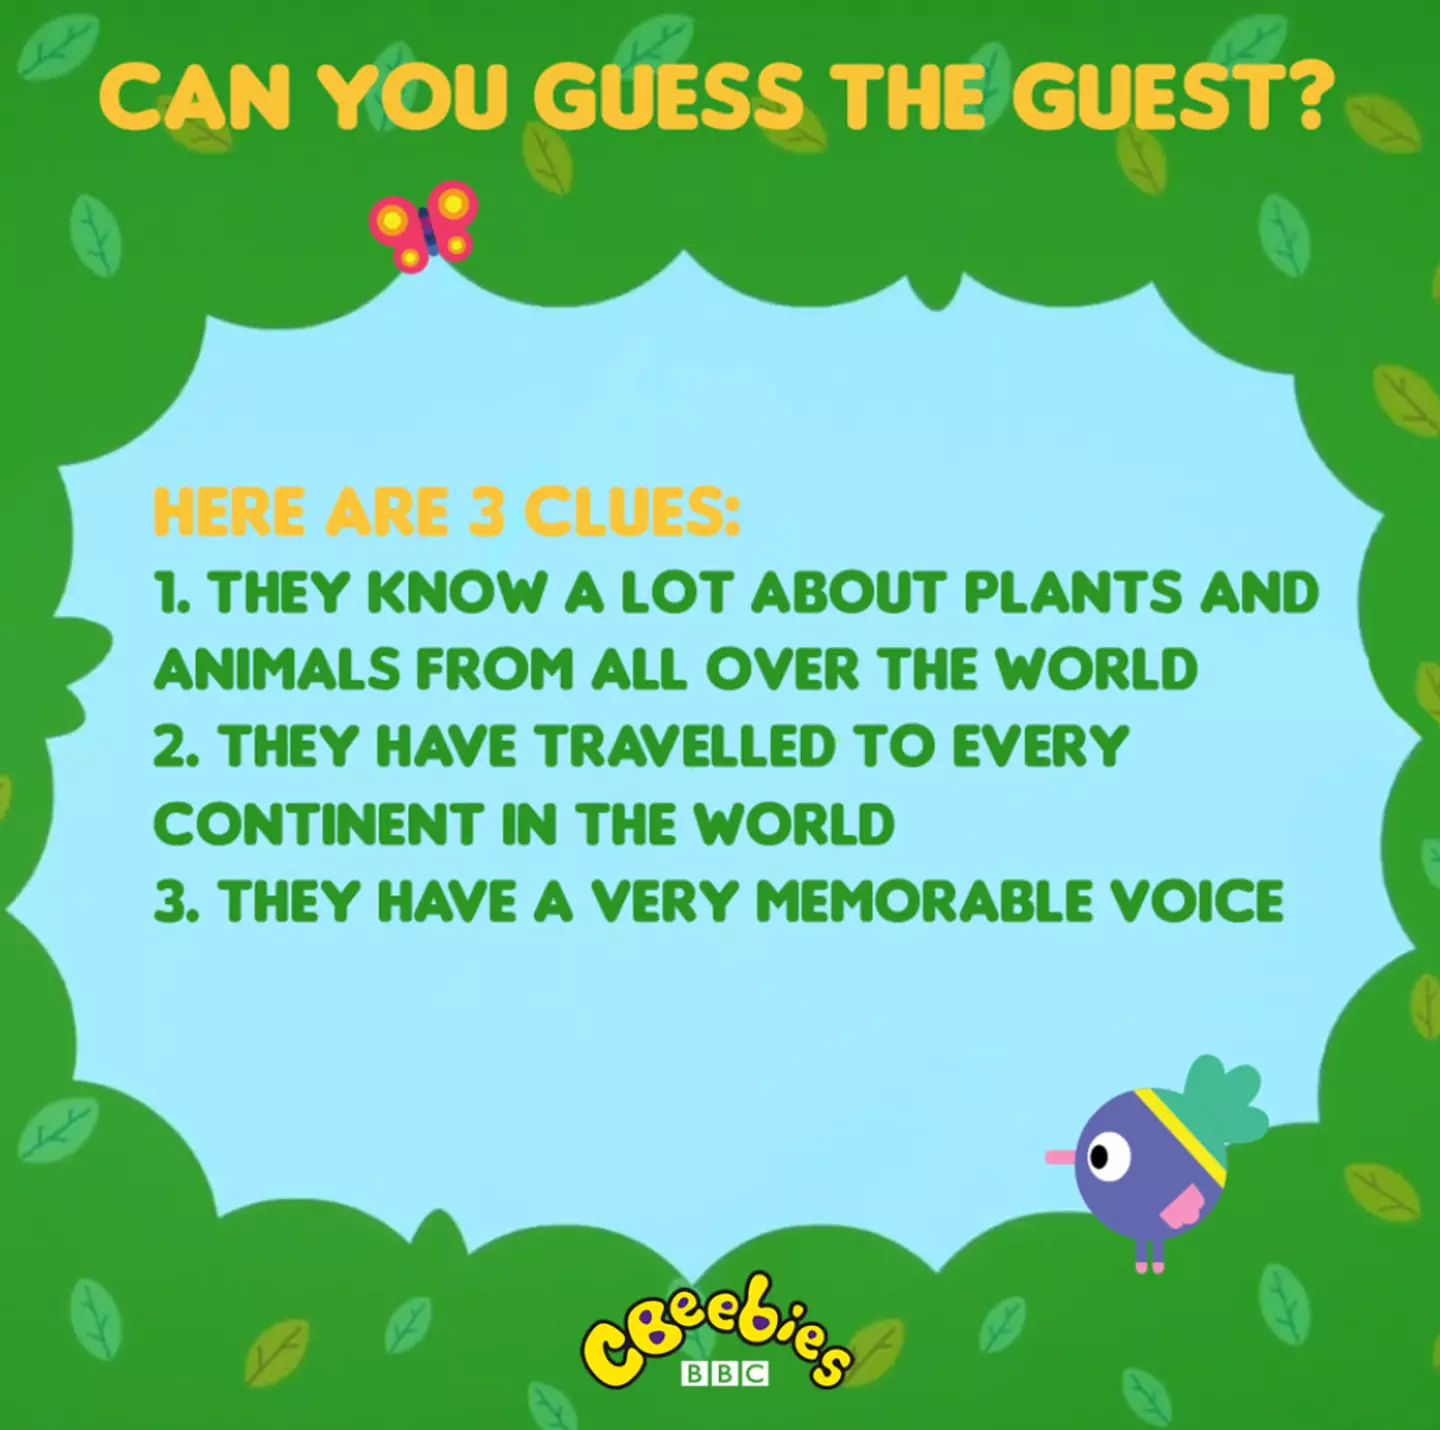 CBeebies posted some clues (